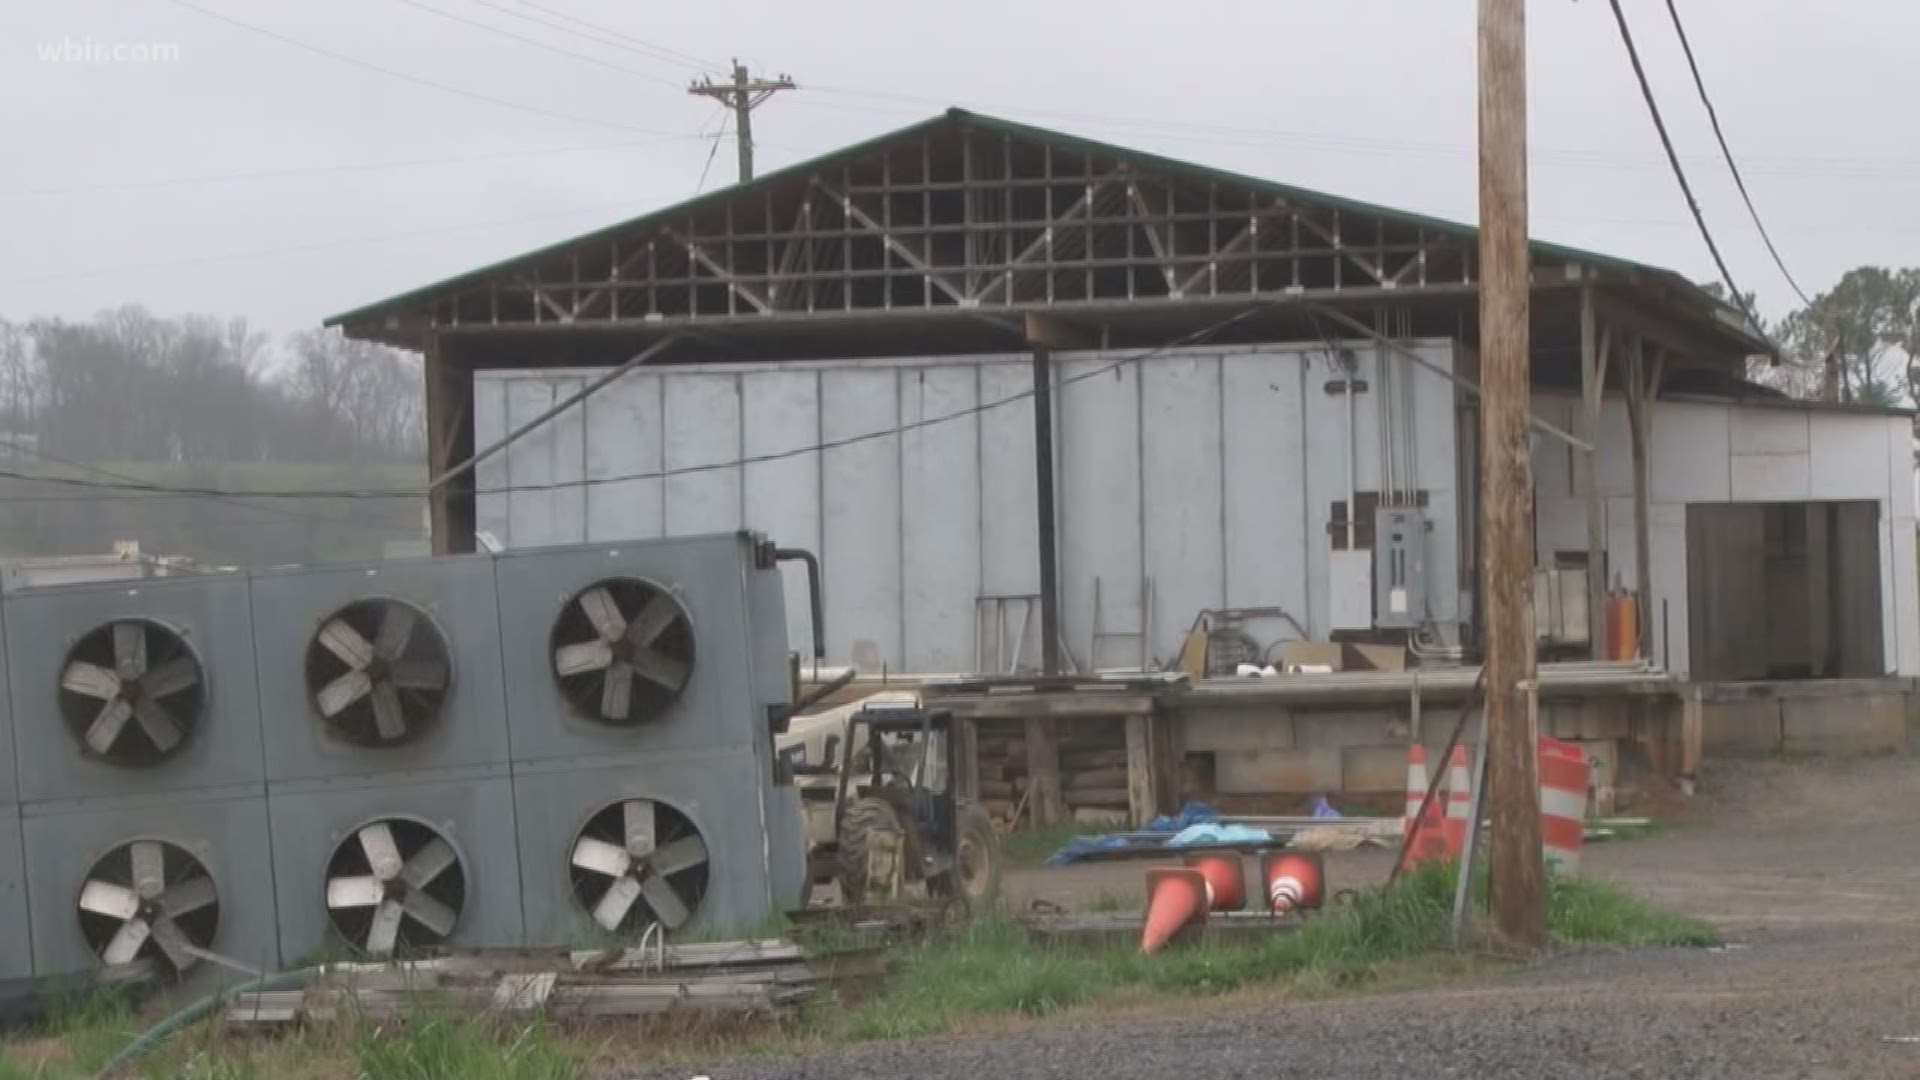 A Grainger County family says they're upset no one told them about a meat packing plant may have contaminated ground water.